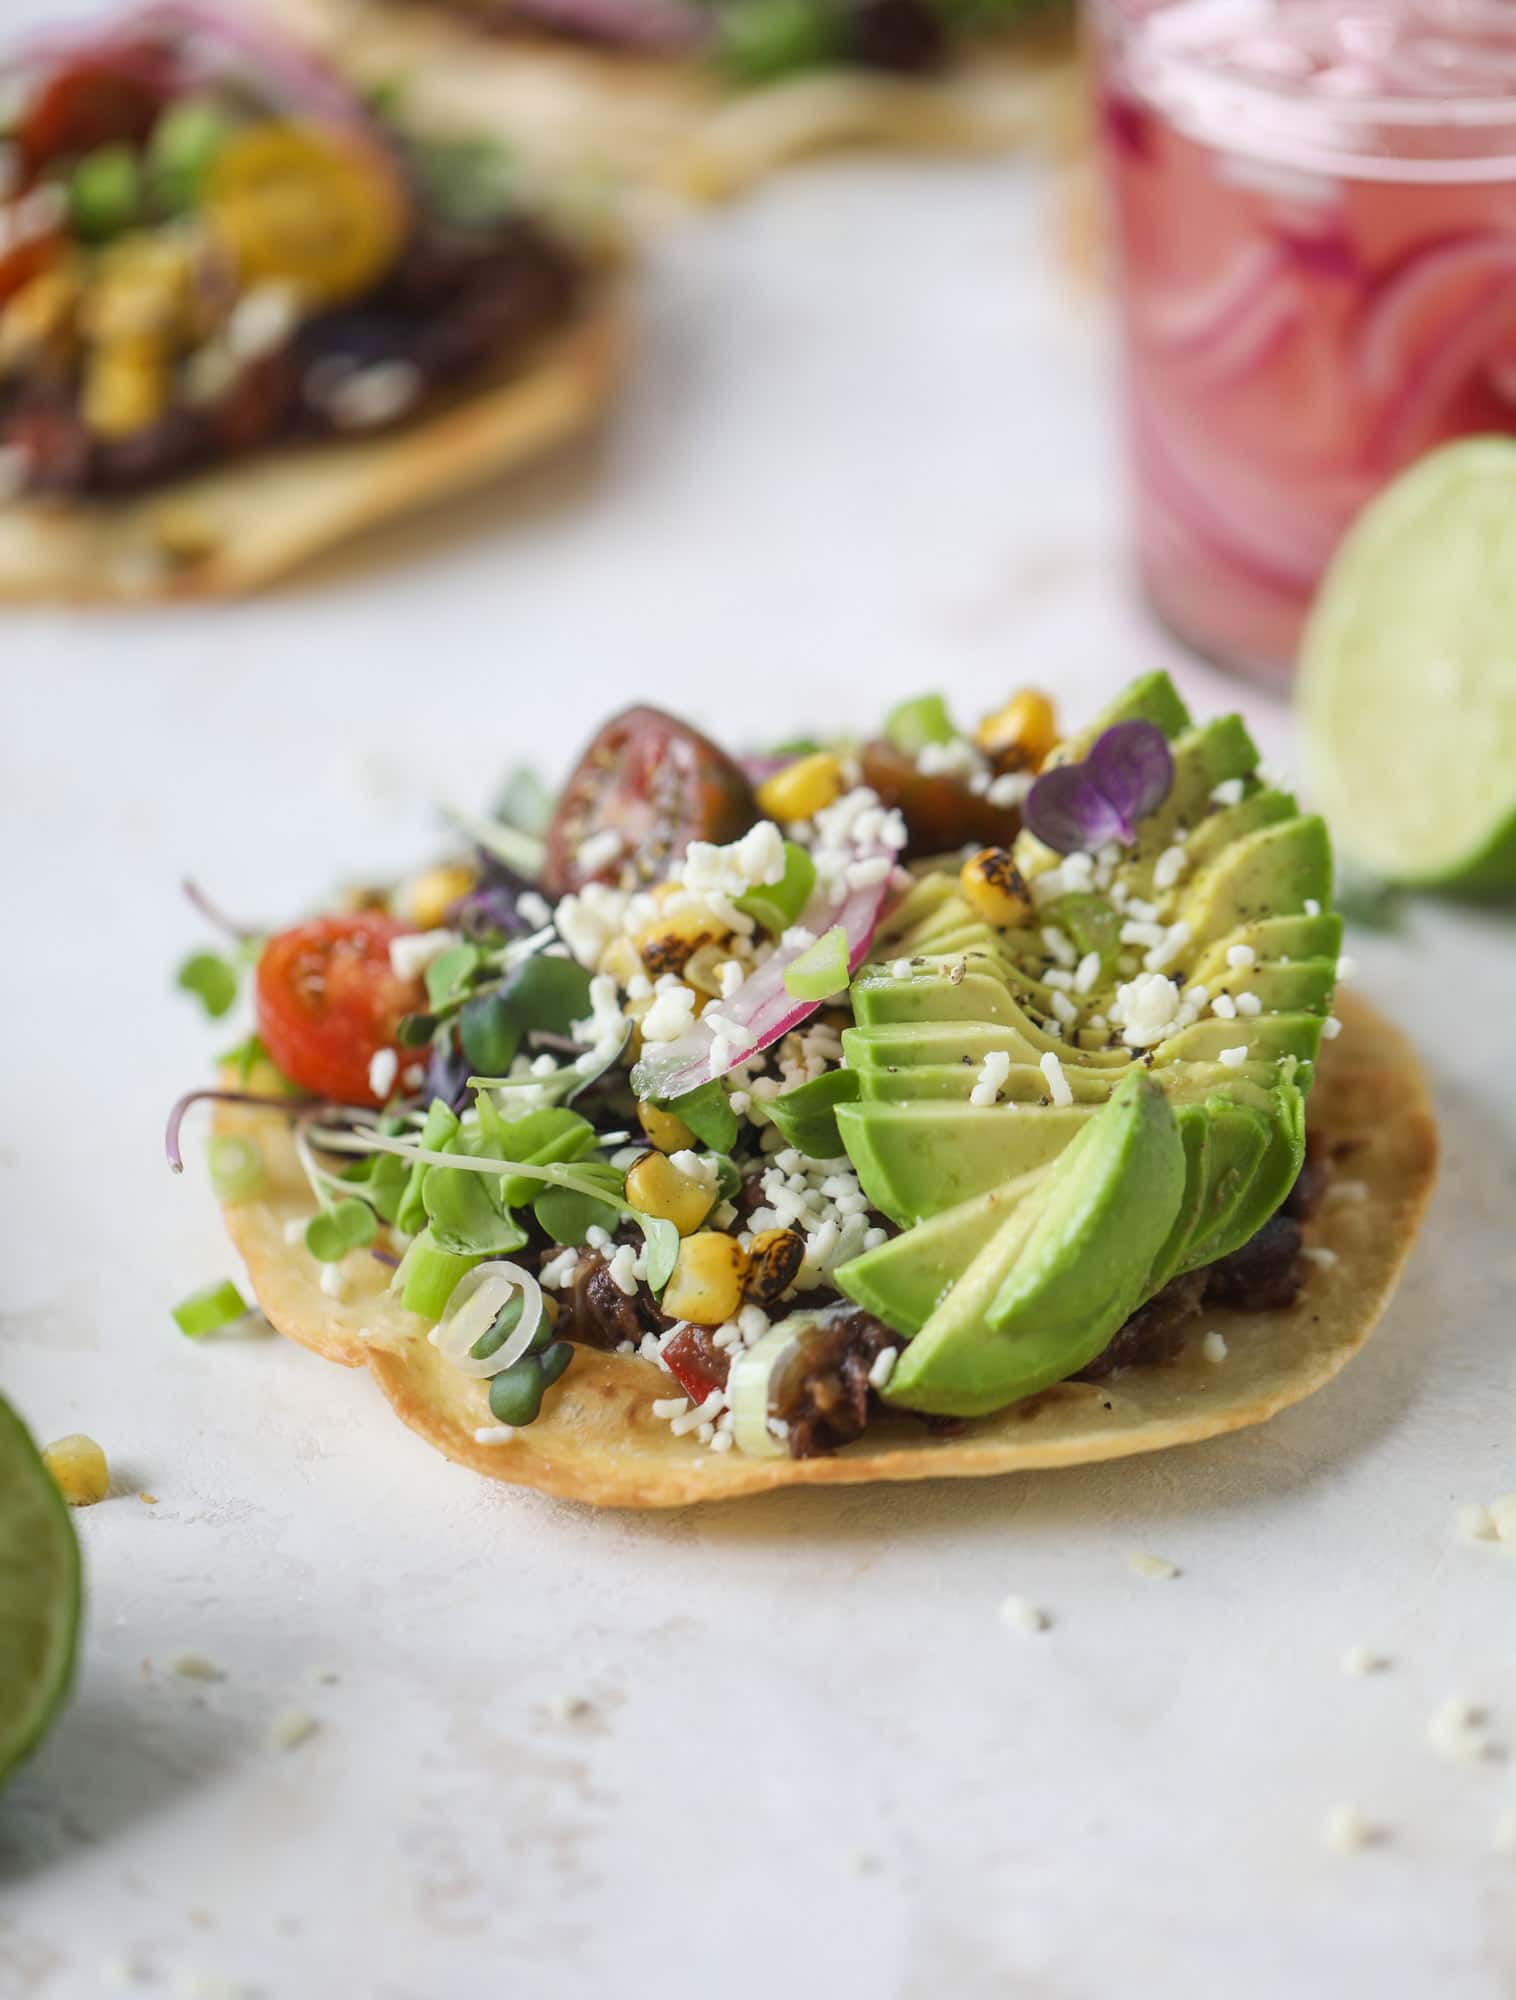 These saucy black bean tostadas are super flavorful and easy for a weeknight meal. Crunchy tortillas topped with beans and tons of veggies. Delish!